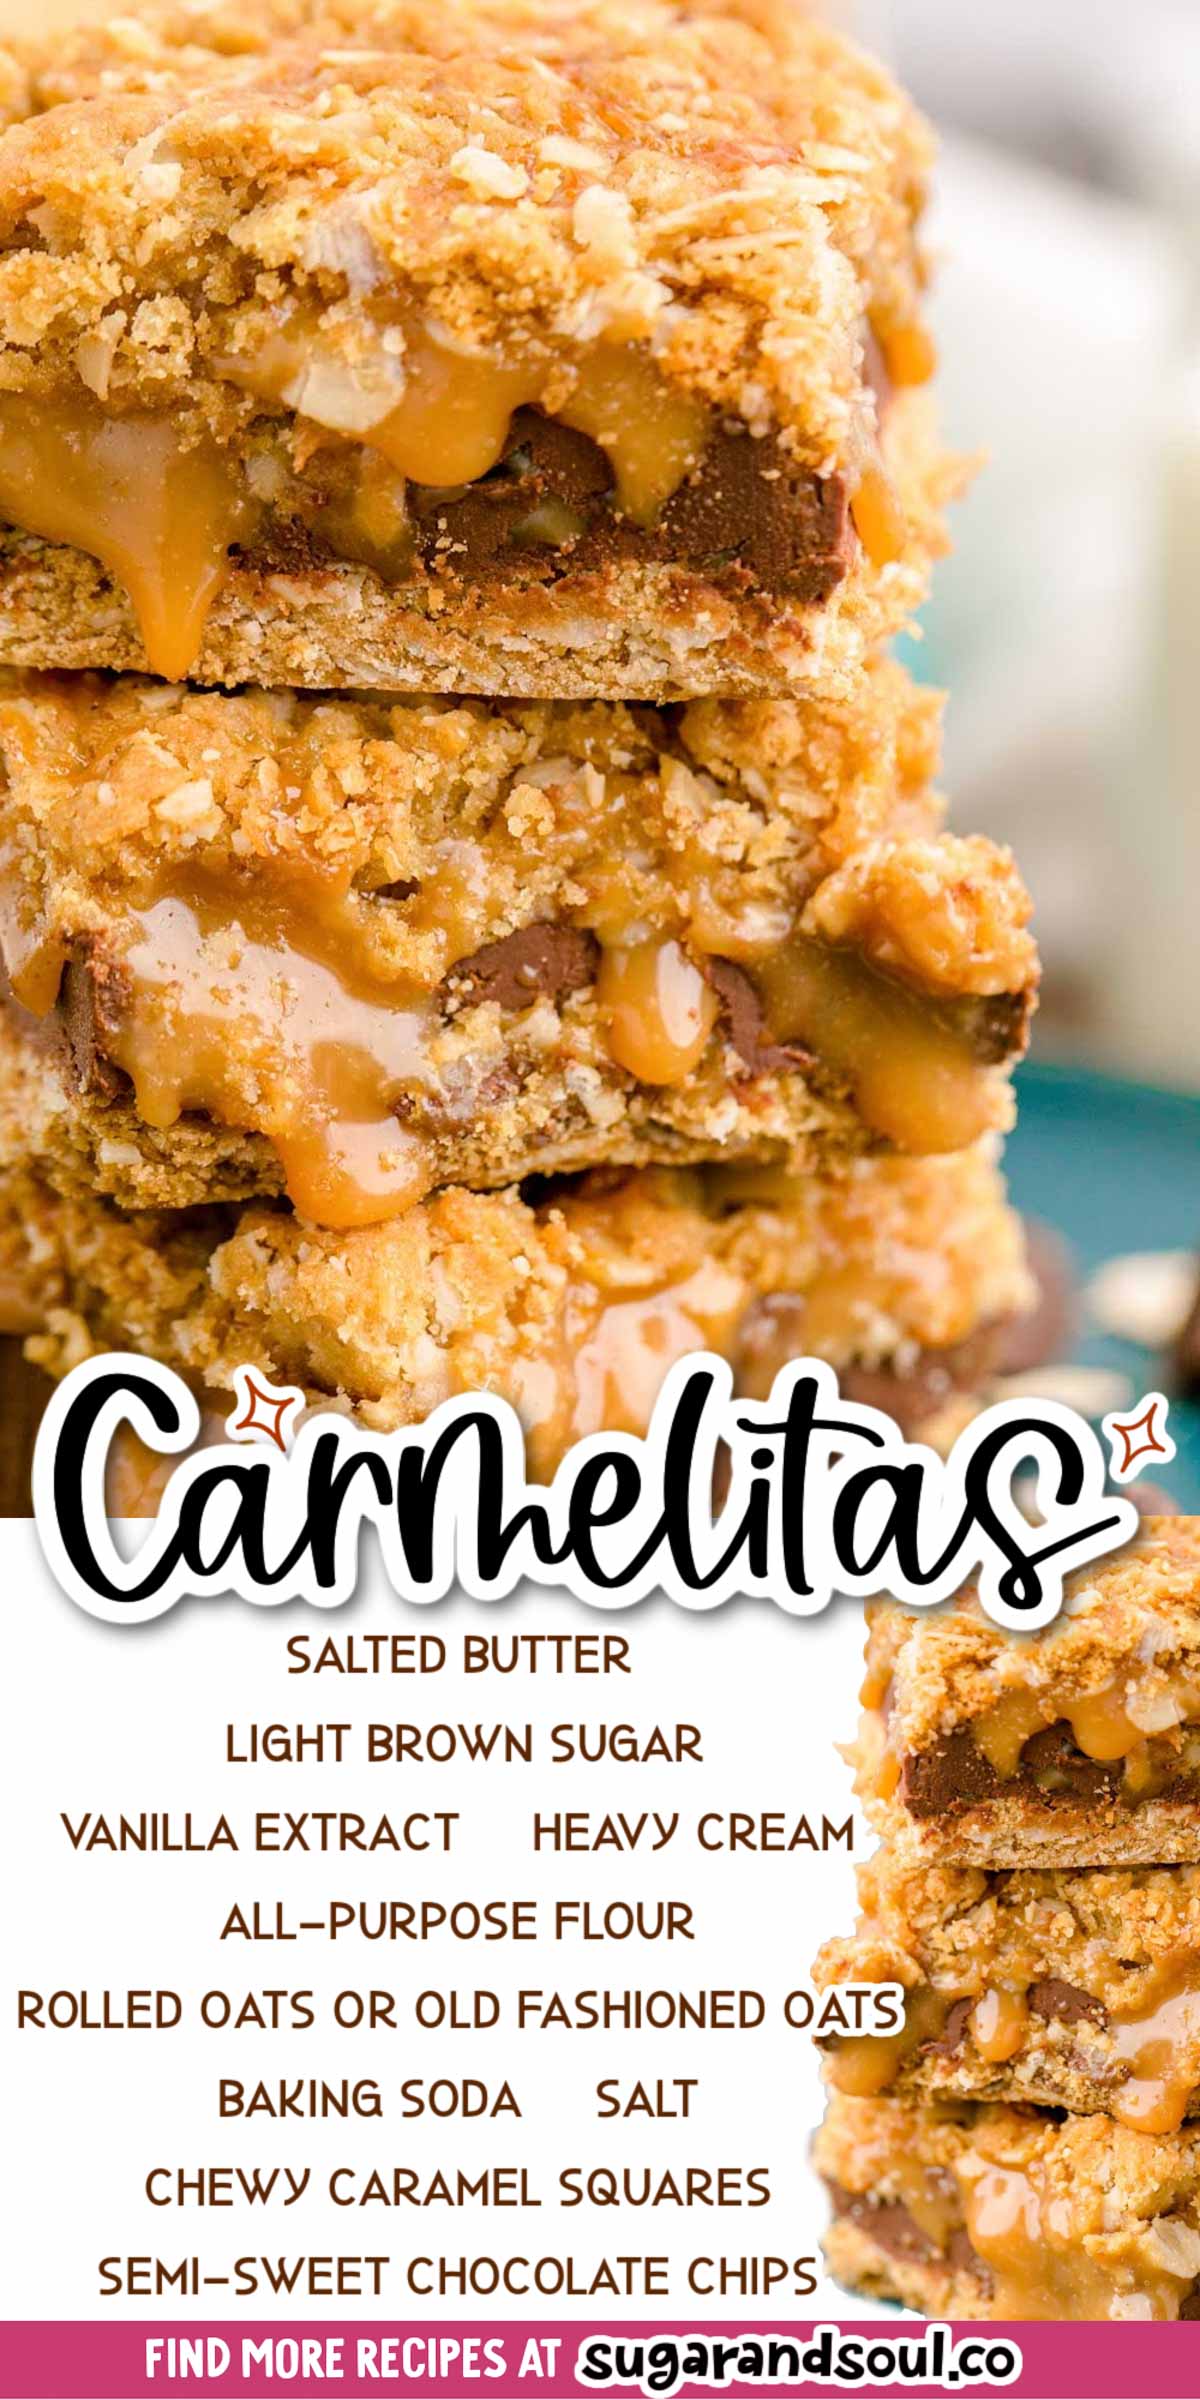 Carmelitas sandwich a gooey chocolate and caramel center between an oatmeal-brown sugar crust for an easy dessert that everyone will devour! Prep this treat in just 15 minutes! via @sugarandsoulco